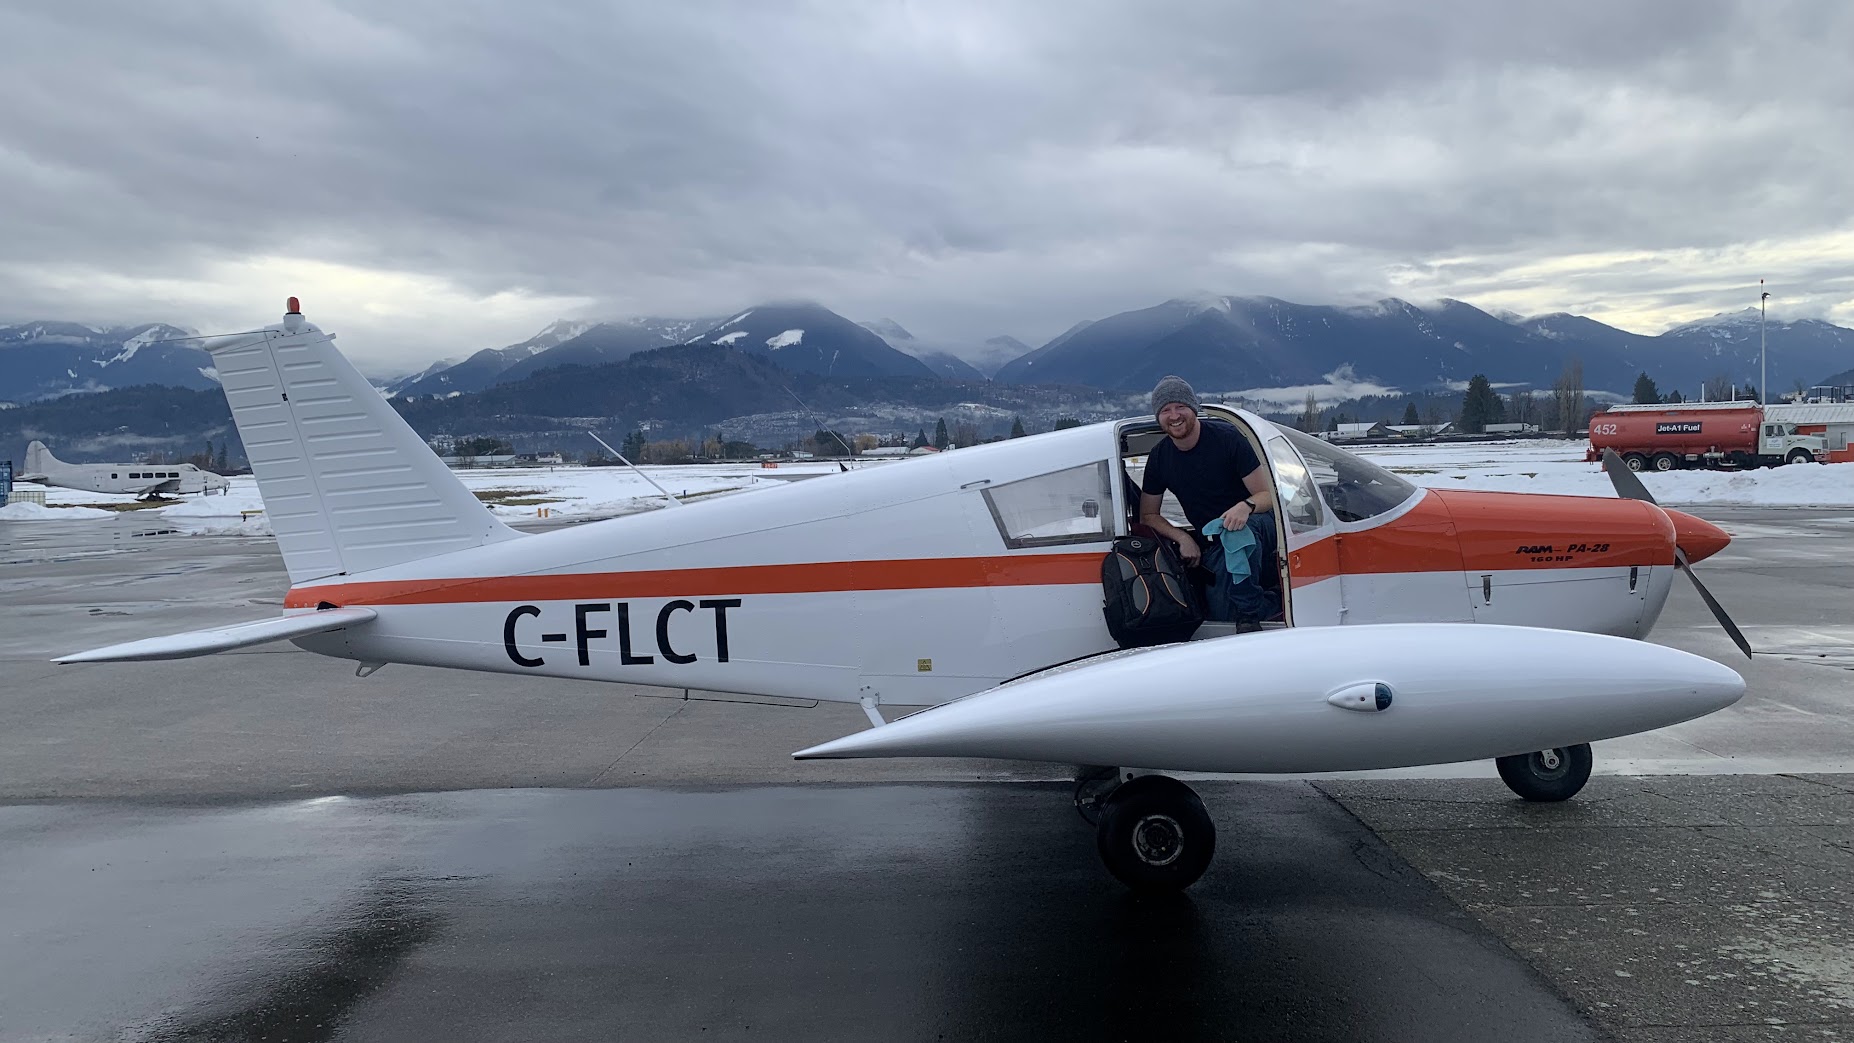 On a plane in Chilliwack, BC